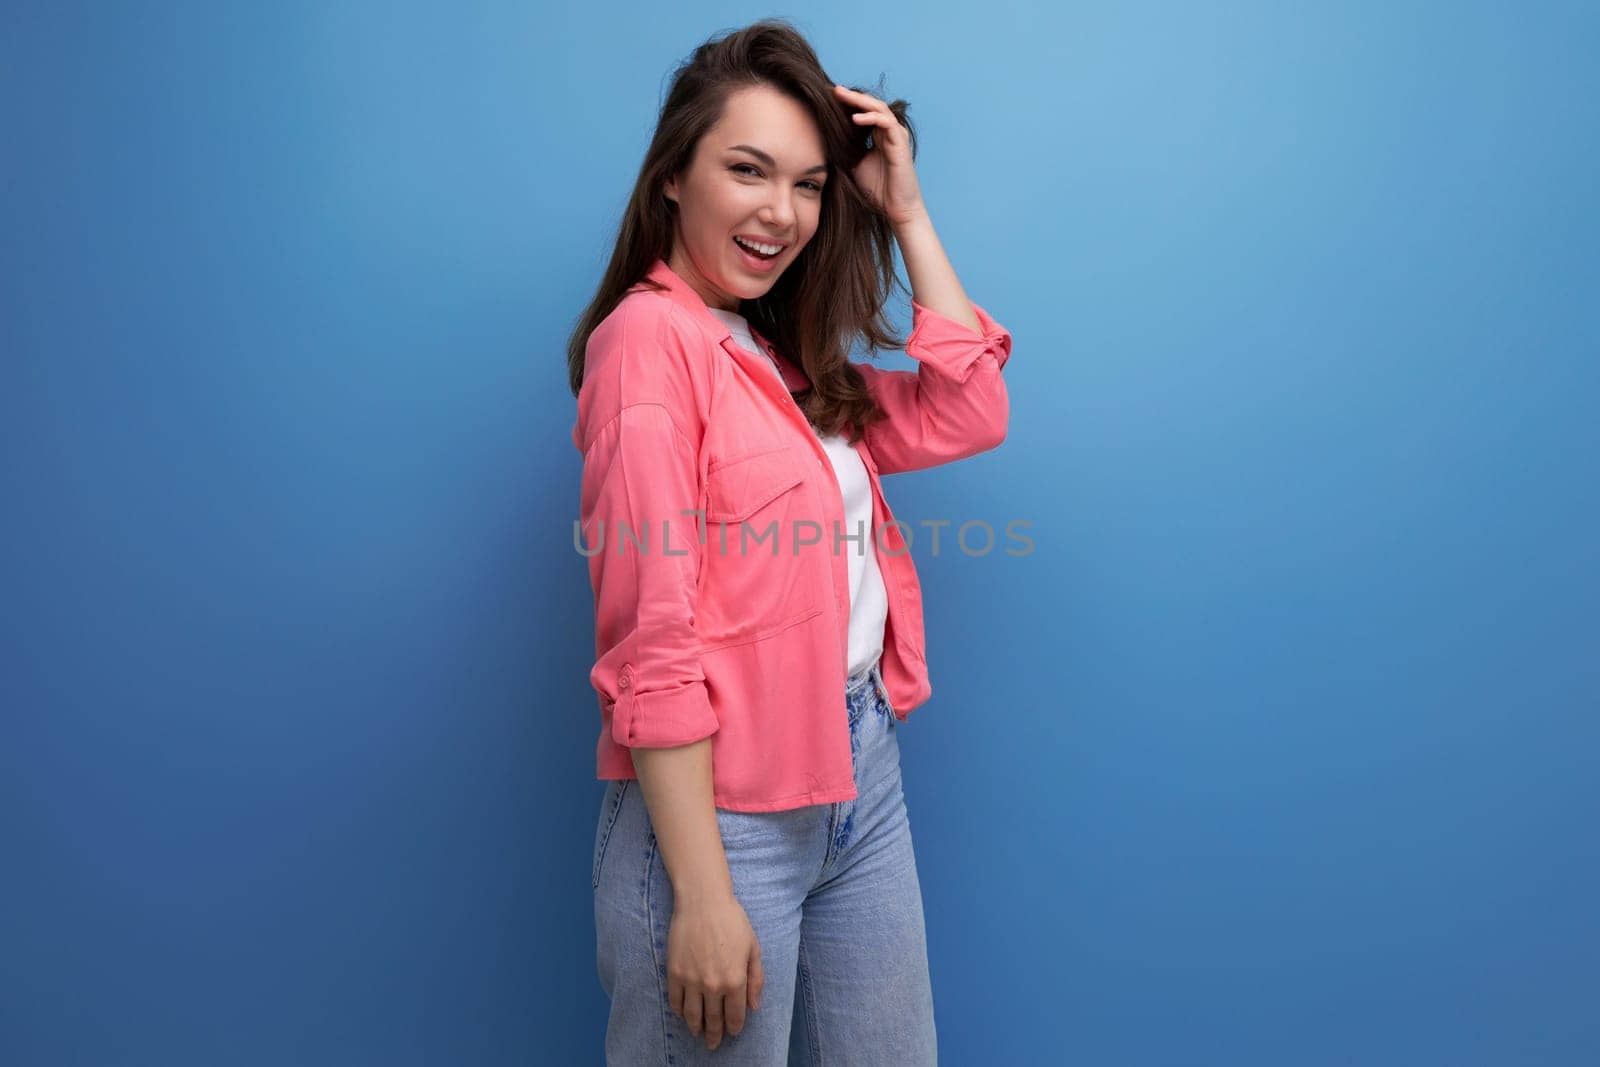 portrait of a brunette woman in a shirt and jeans posing with a smile on a studio background.